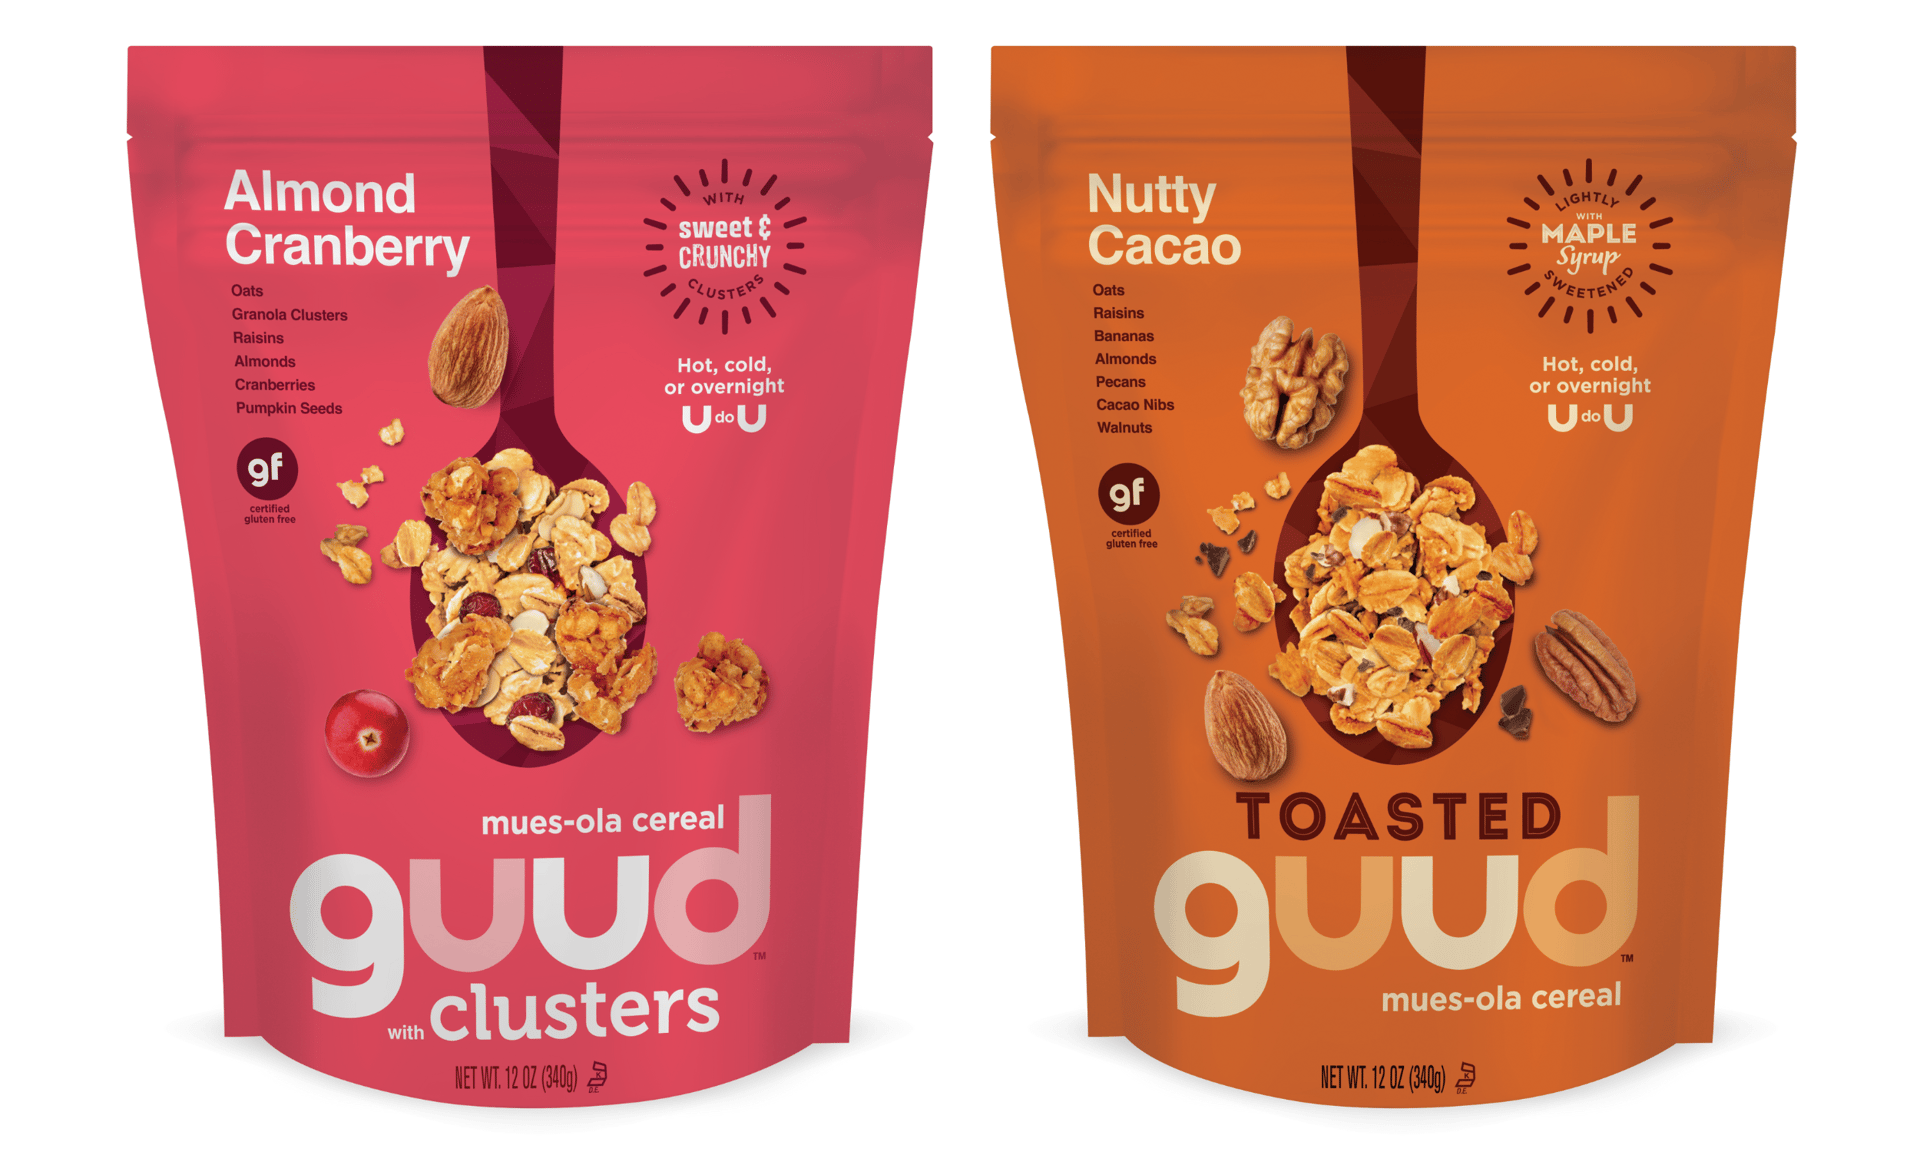 Packaging and labeling, Spoon, Orange, Pink, Granola, Stand-up pouch